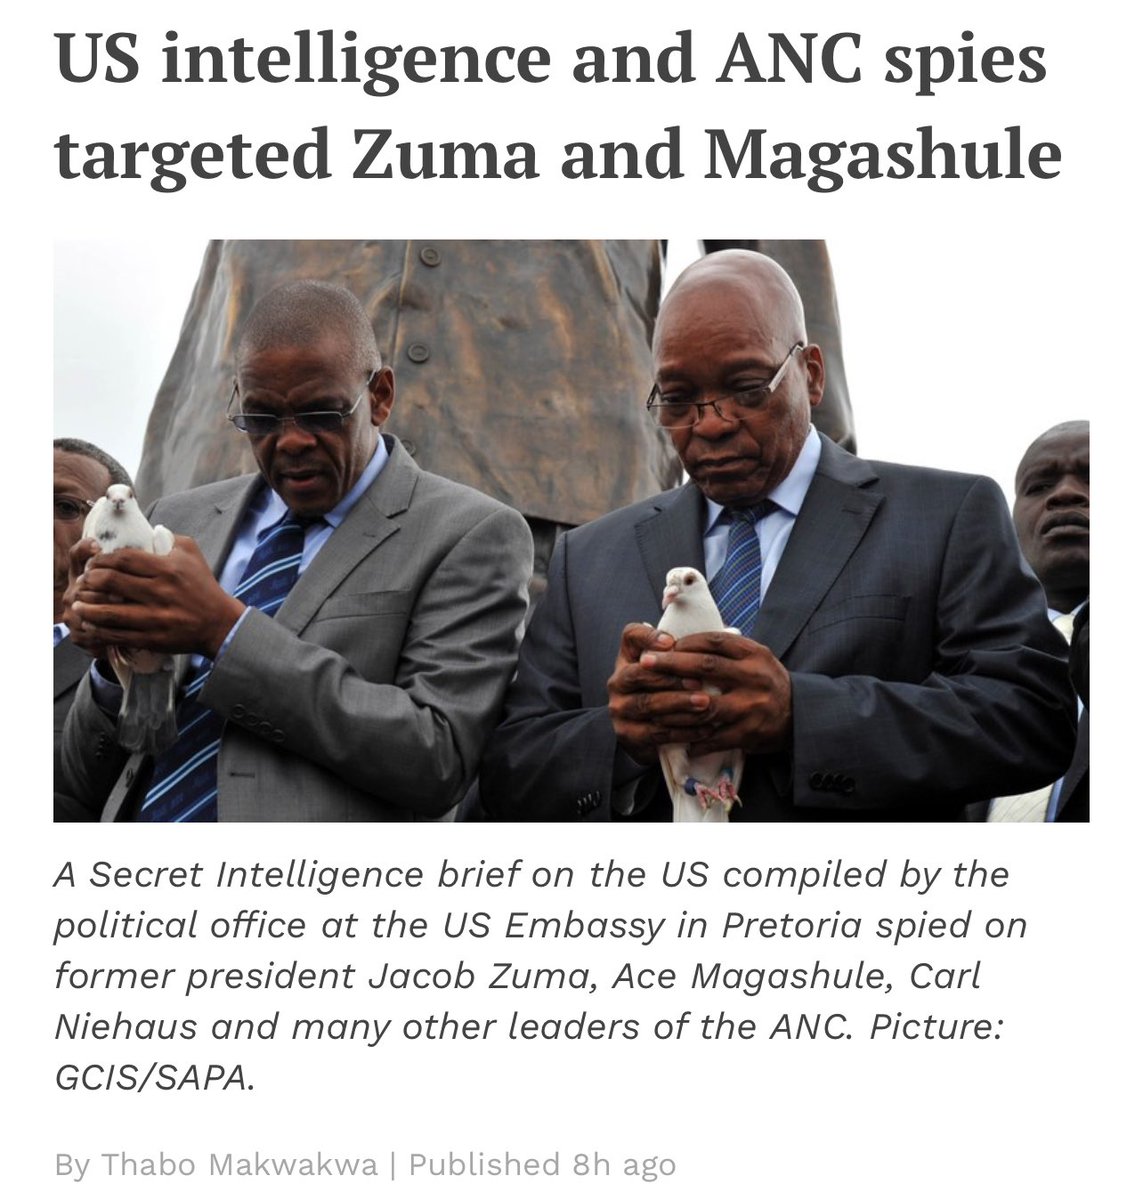 Ramaphosa's ANC worked with the CIA to spy on President Zuma and Ace Magashule.